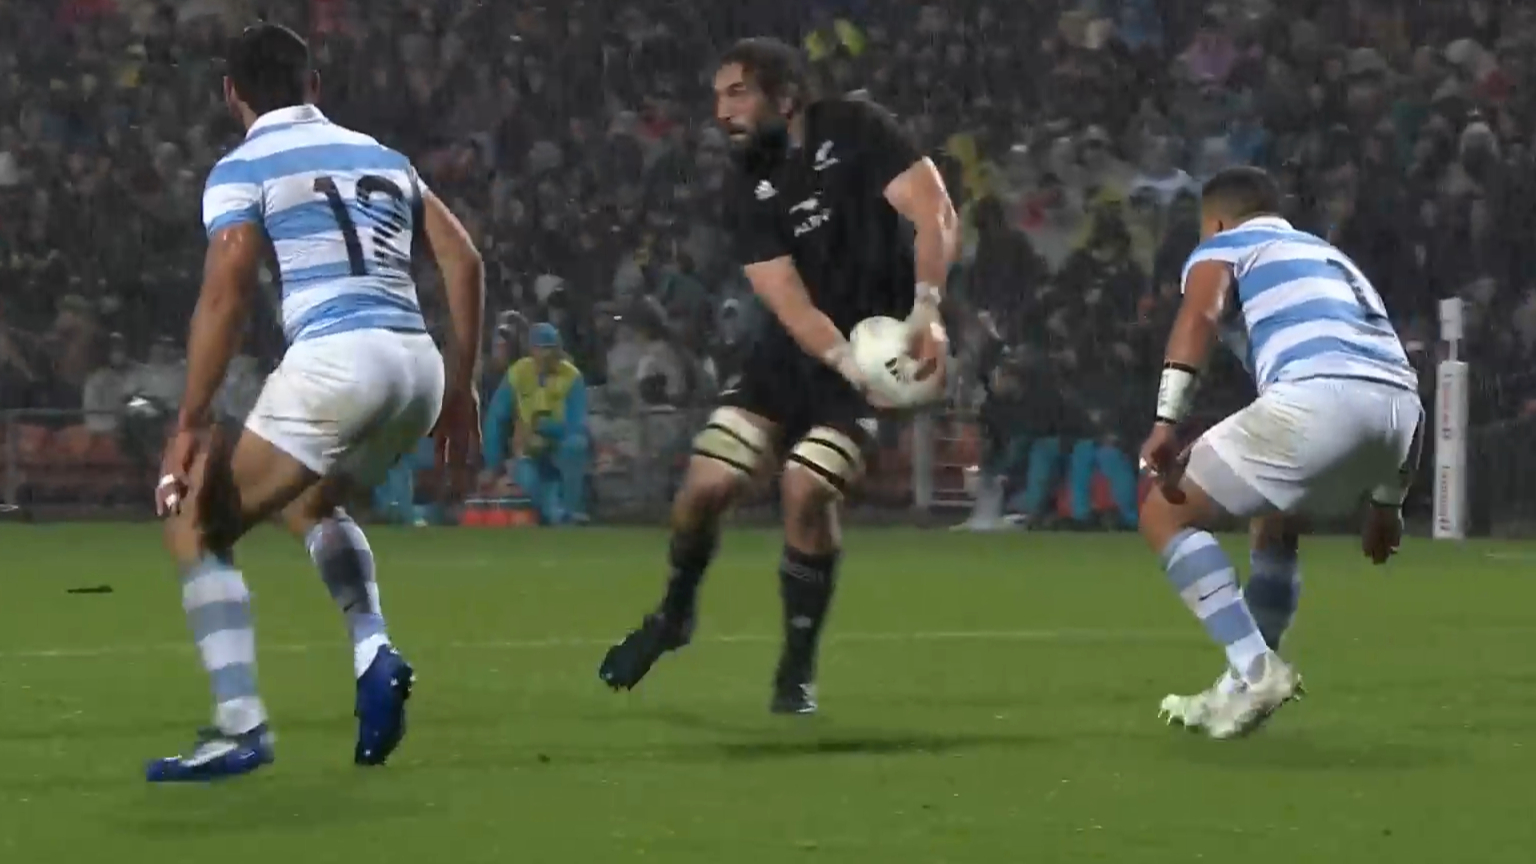 All Blacks prop puts home side out to early lead